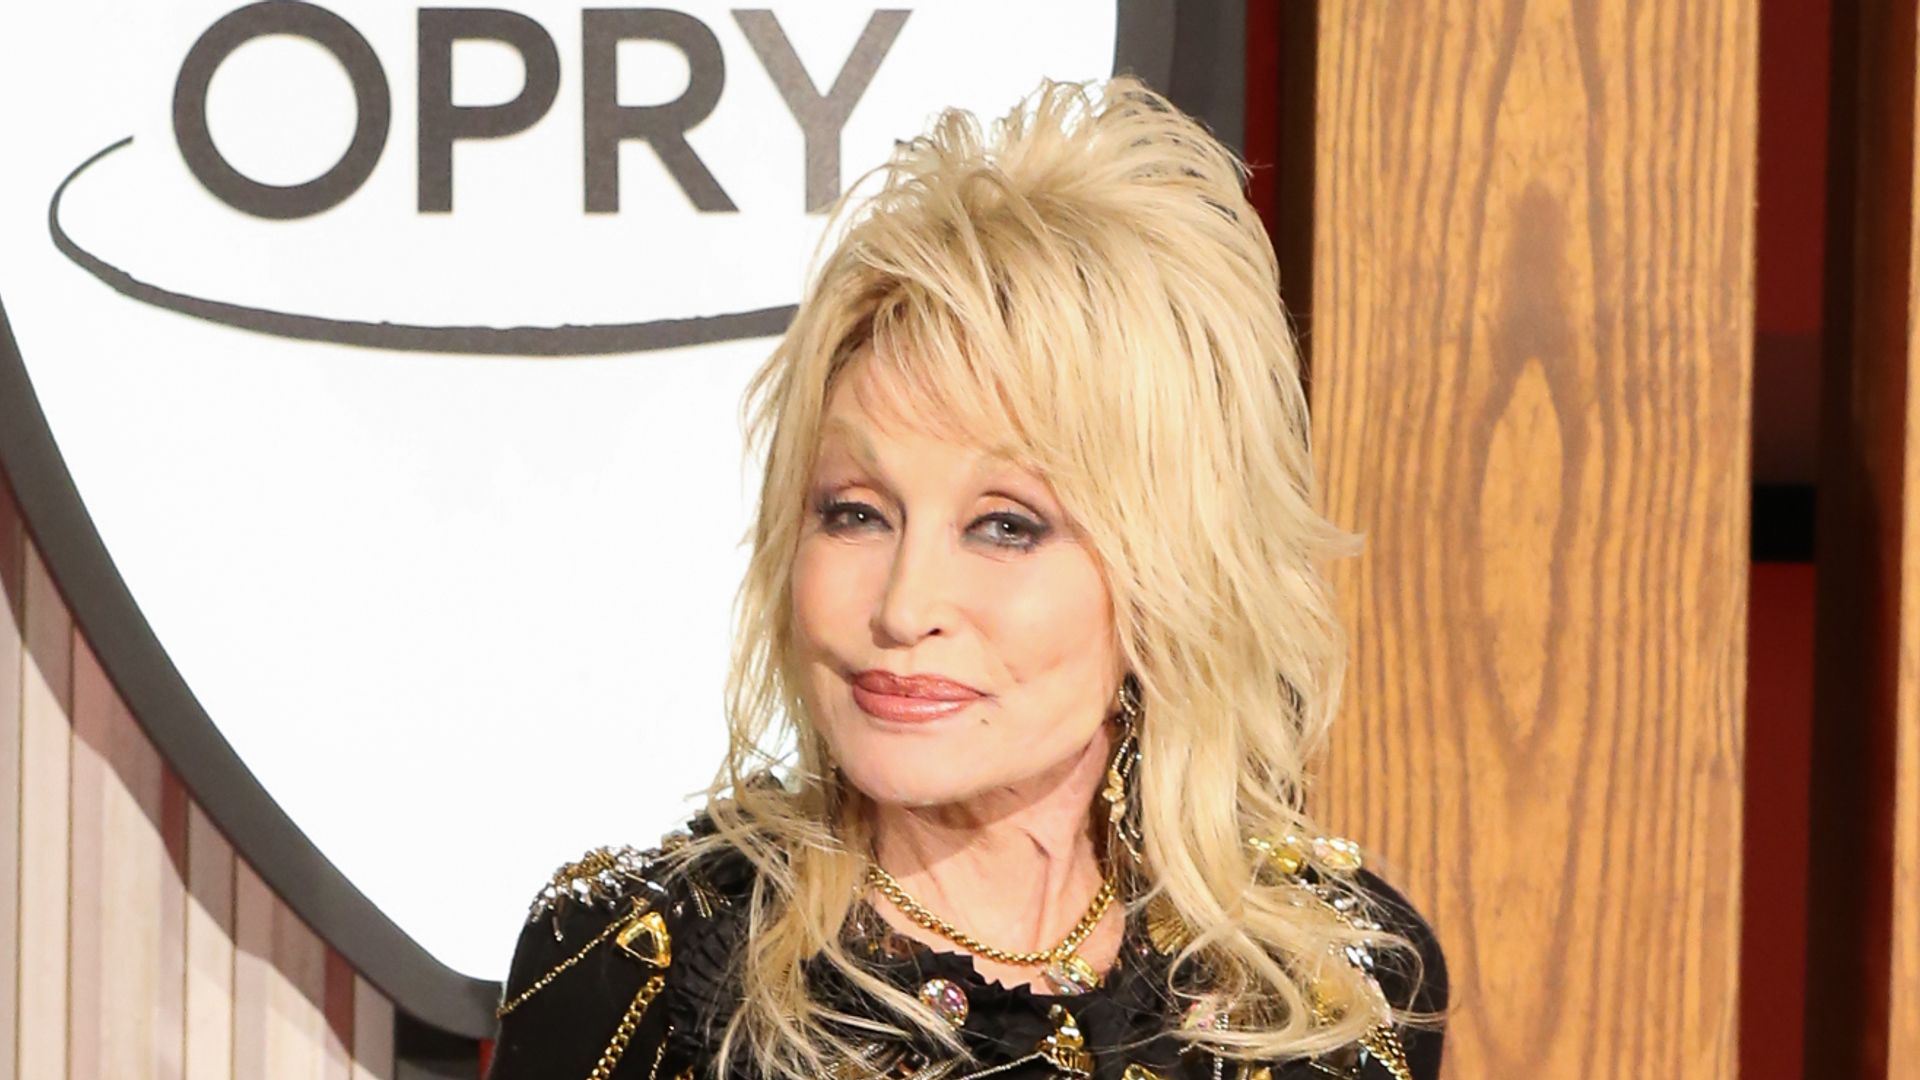 Dolly Parton attends a press conference before a performance celebrating her 50-year anniversary with the Grand Ole Opry at The Grand Ole Opry on October 12, 2019 in Nashville, Tennessee